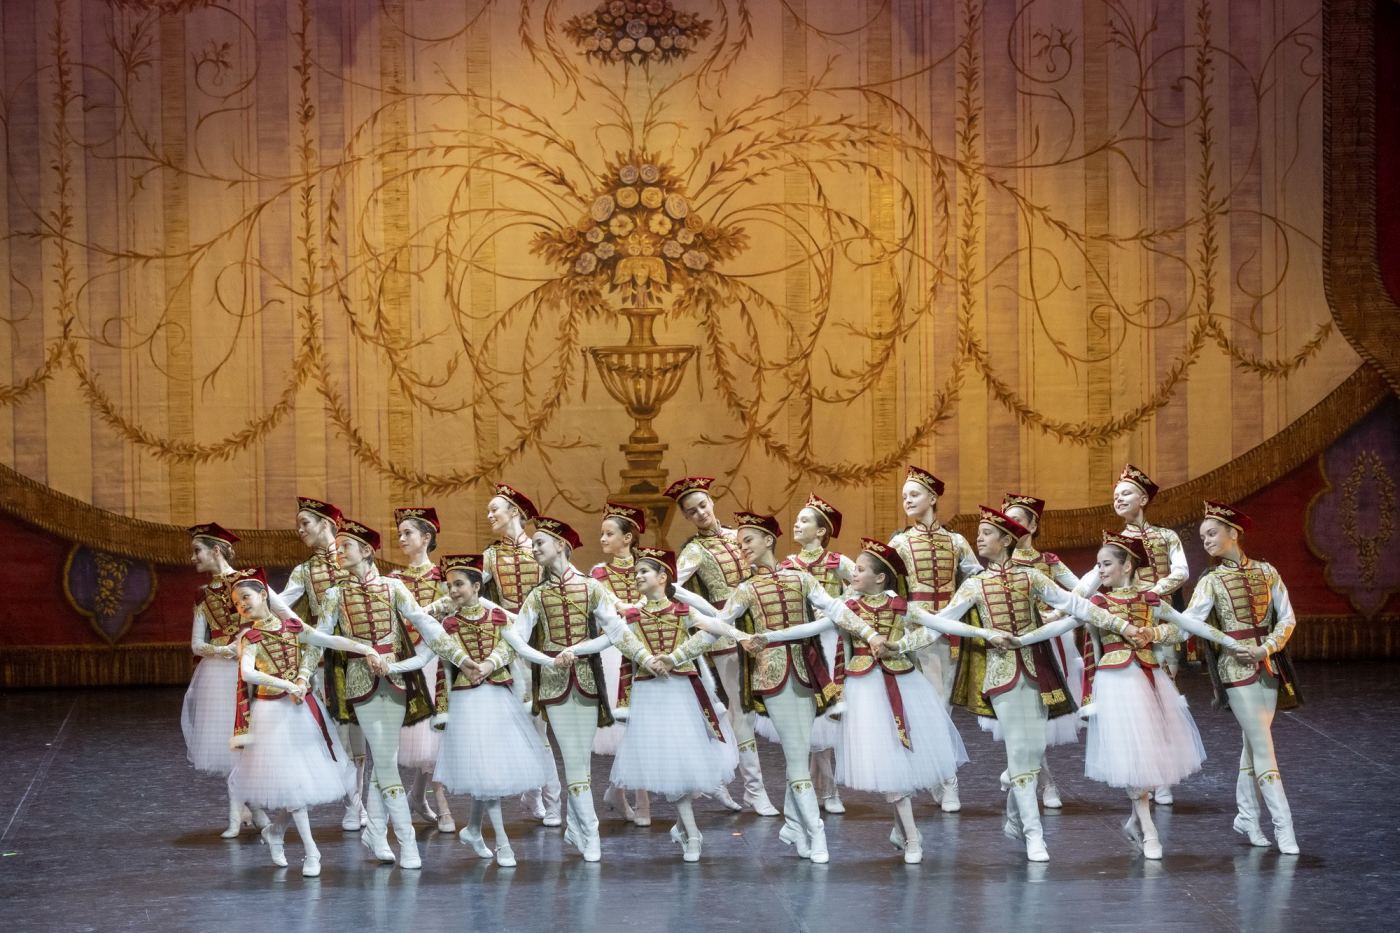 2. Students from the Hungarian National Ballet Institute, “Paquita Suite” by T.Solymosi, A.Mirzoyan, and I.Prokofieva after M.Petipa; Ballet of the Hungarian State Opera 2022 © P.Rákossy / Hungarian State Opera 